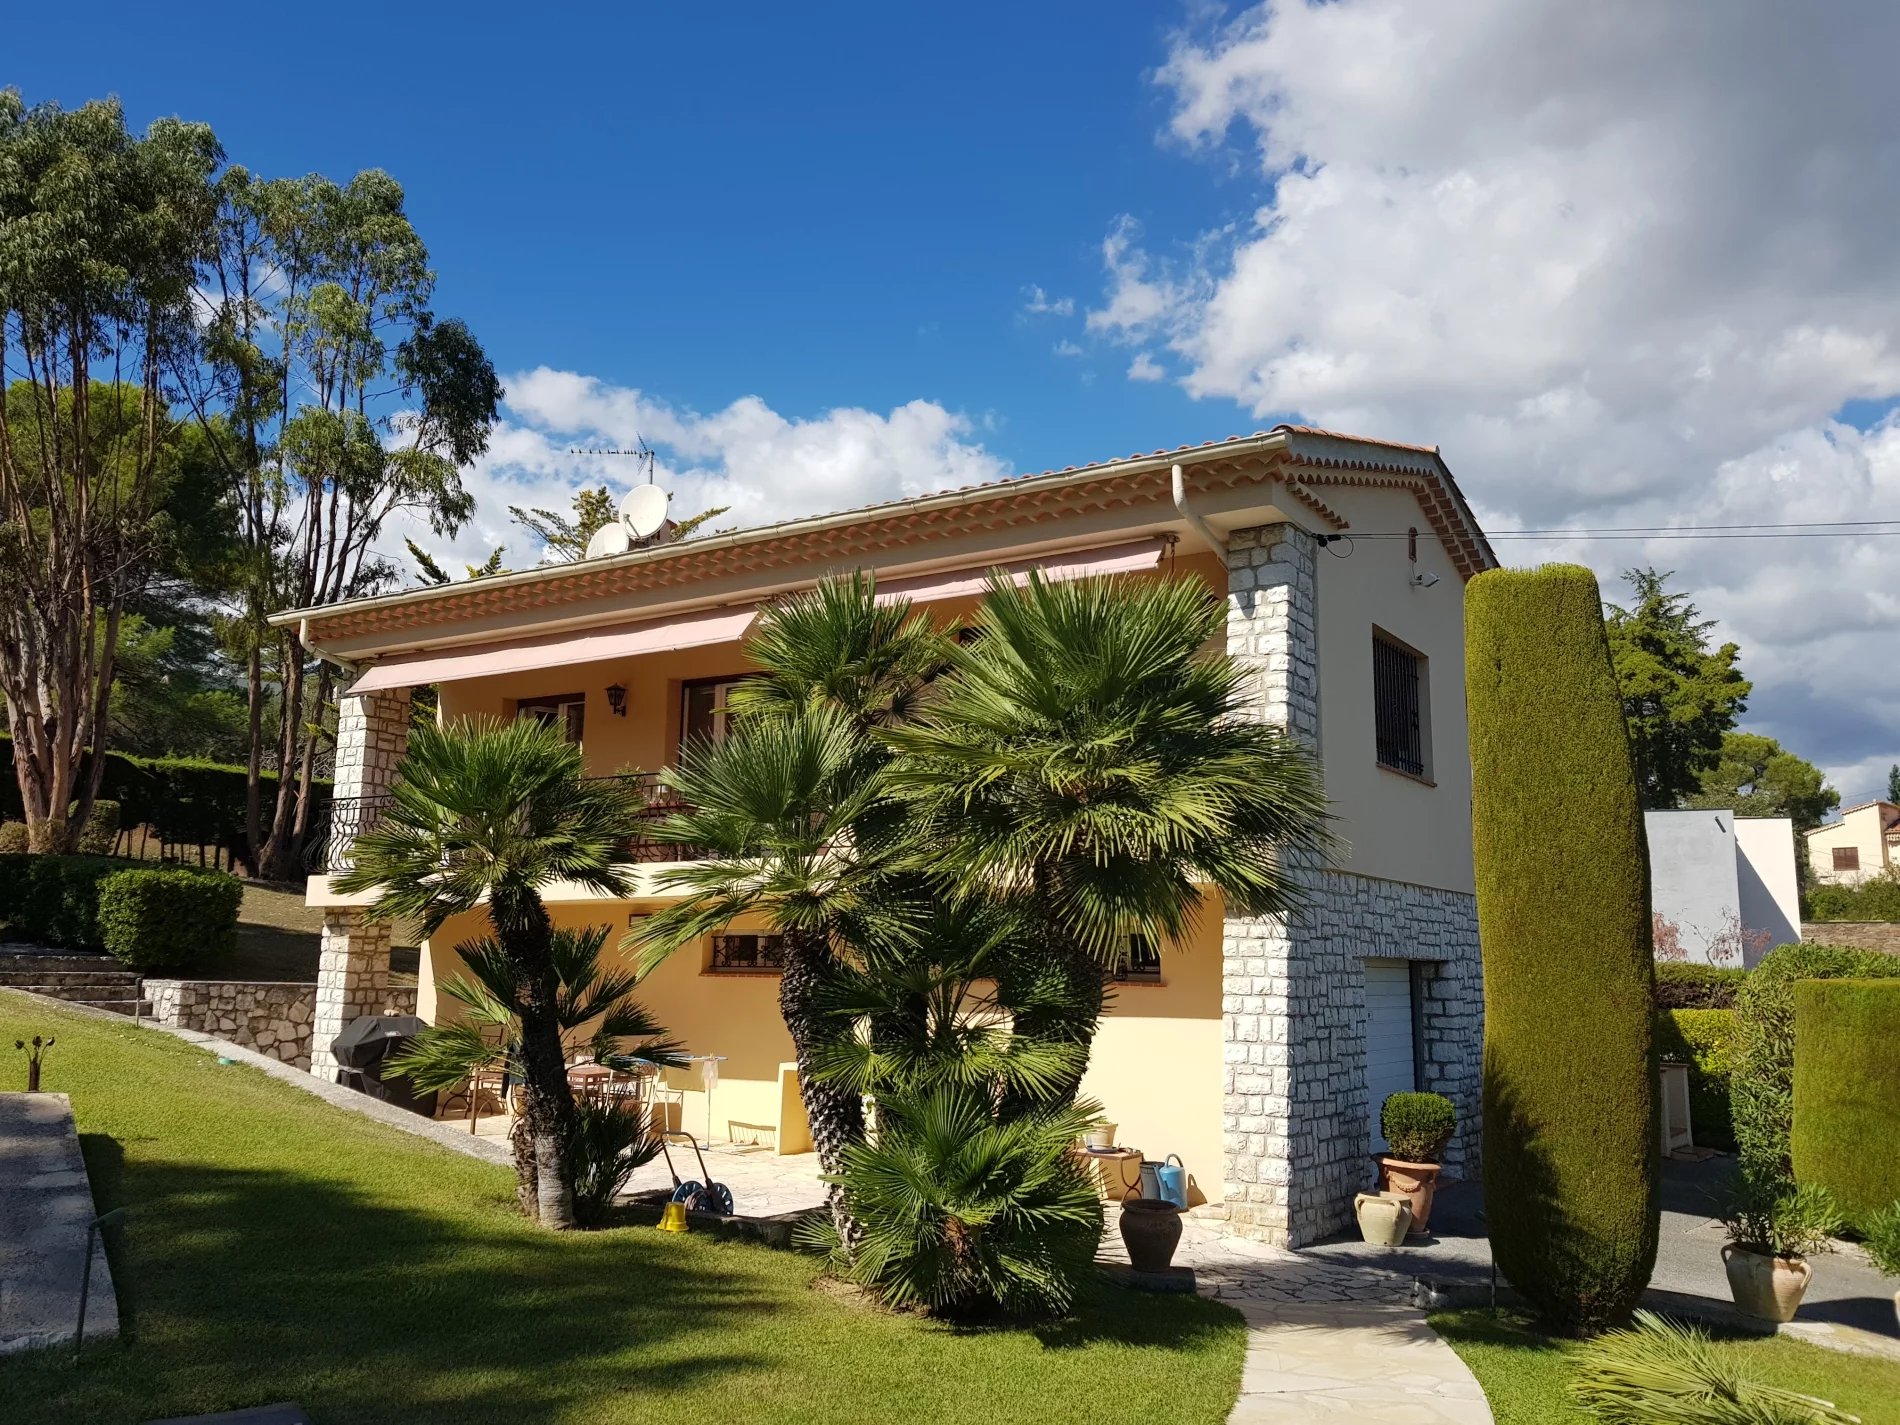 Lovely provencale villa in gated domain close to Mougins village